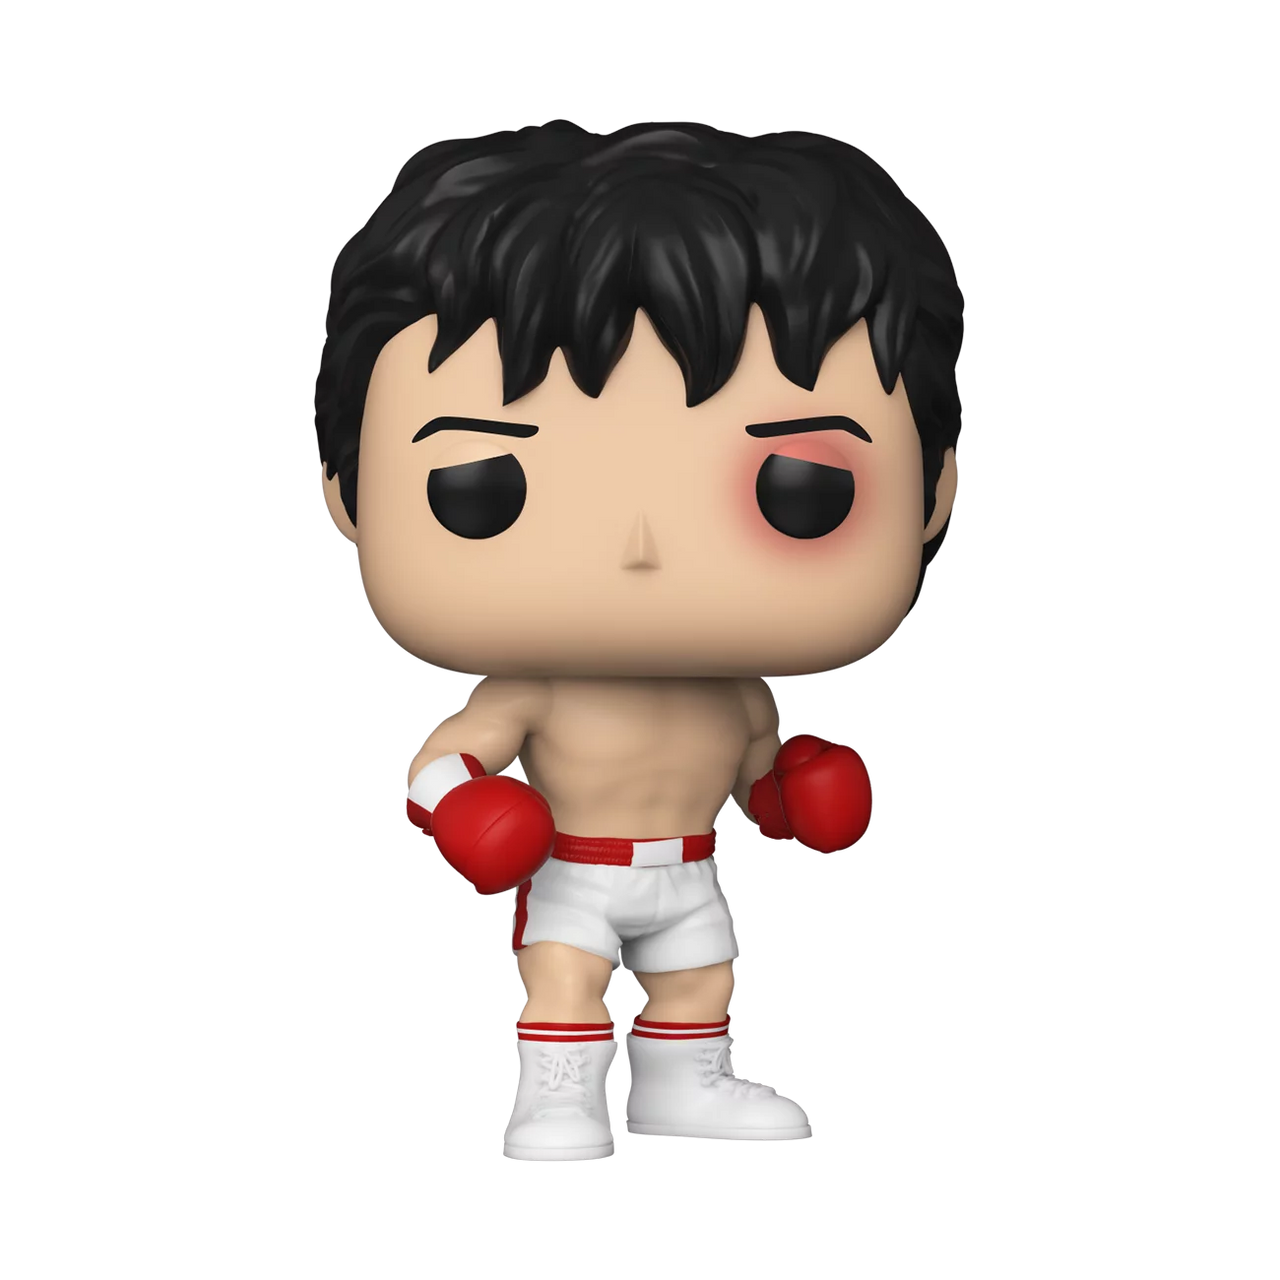 Bulk* Funko POP! Movies Rocky - 45th Anniversary: Rocky Balboa Vinyl Figure  - Case Of 6 Figures - Only 1 Available - Gemini Collectibles